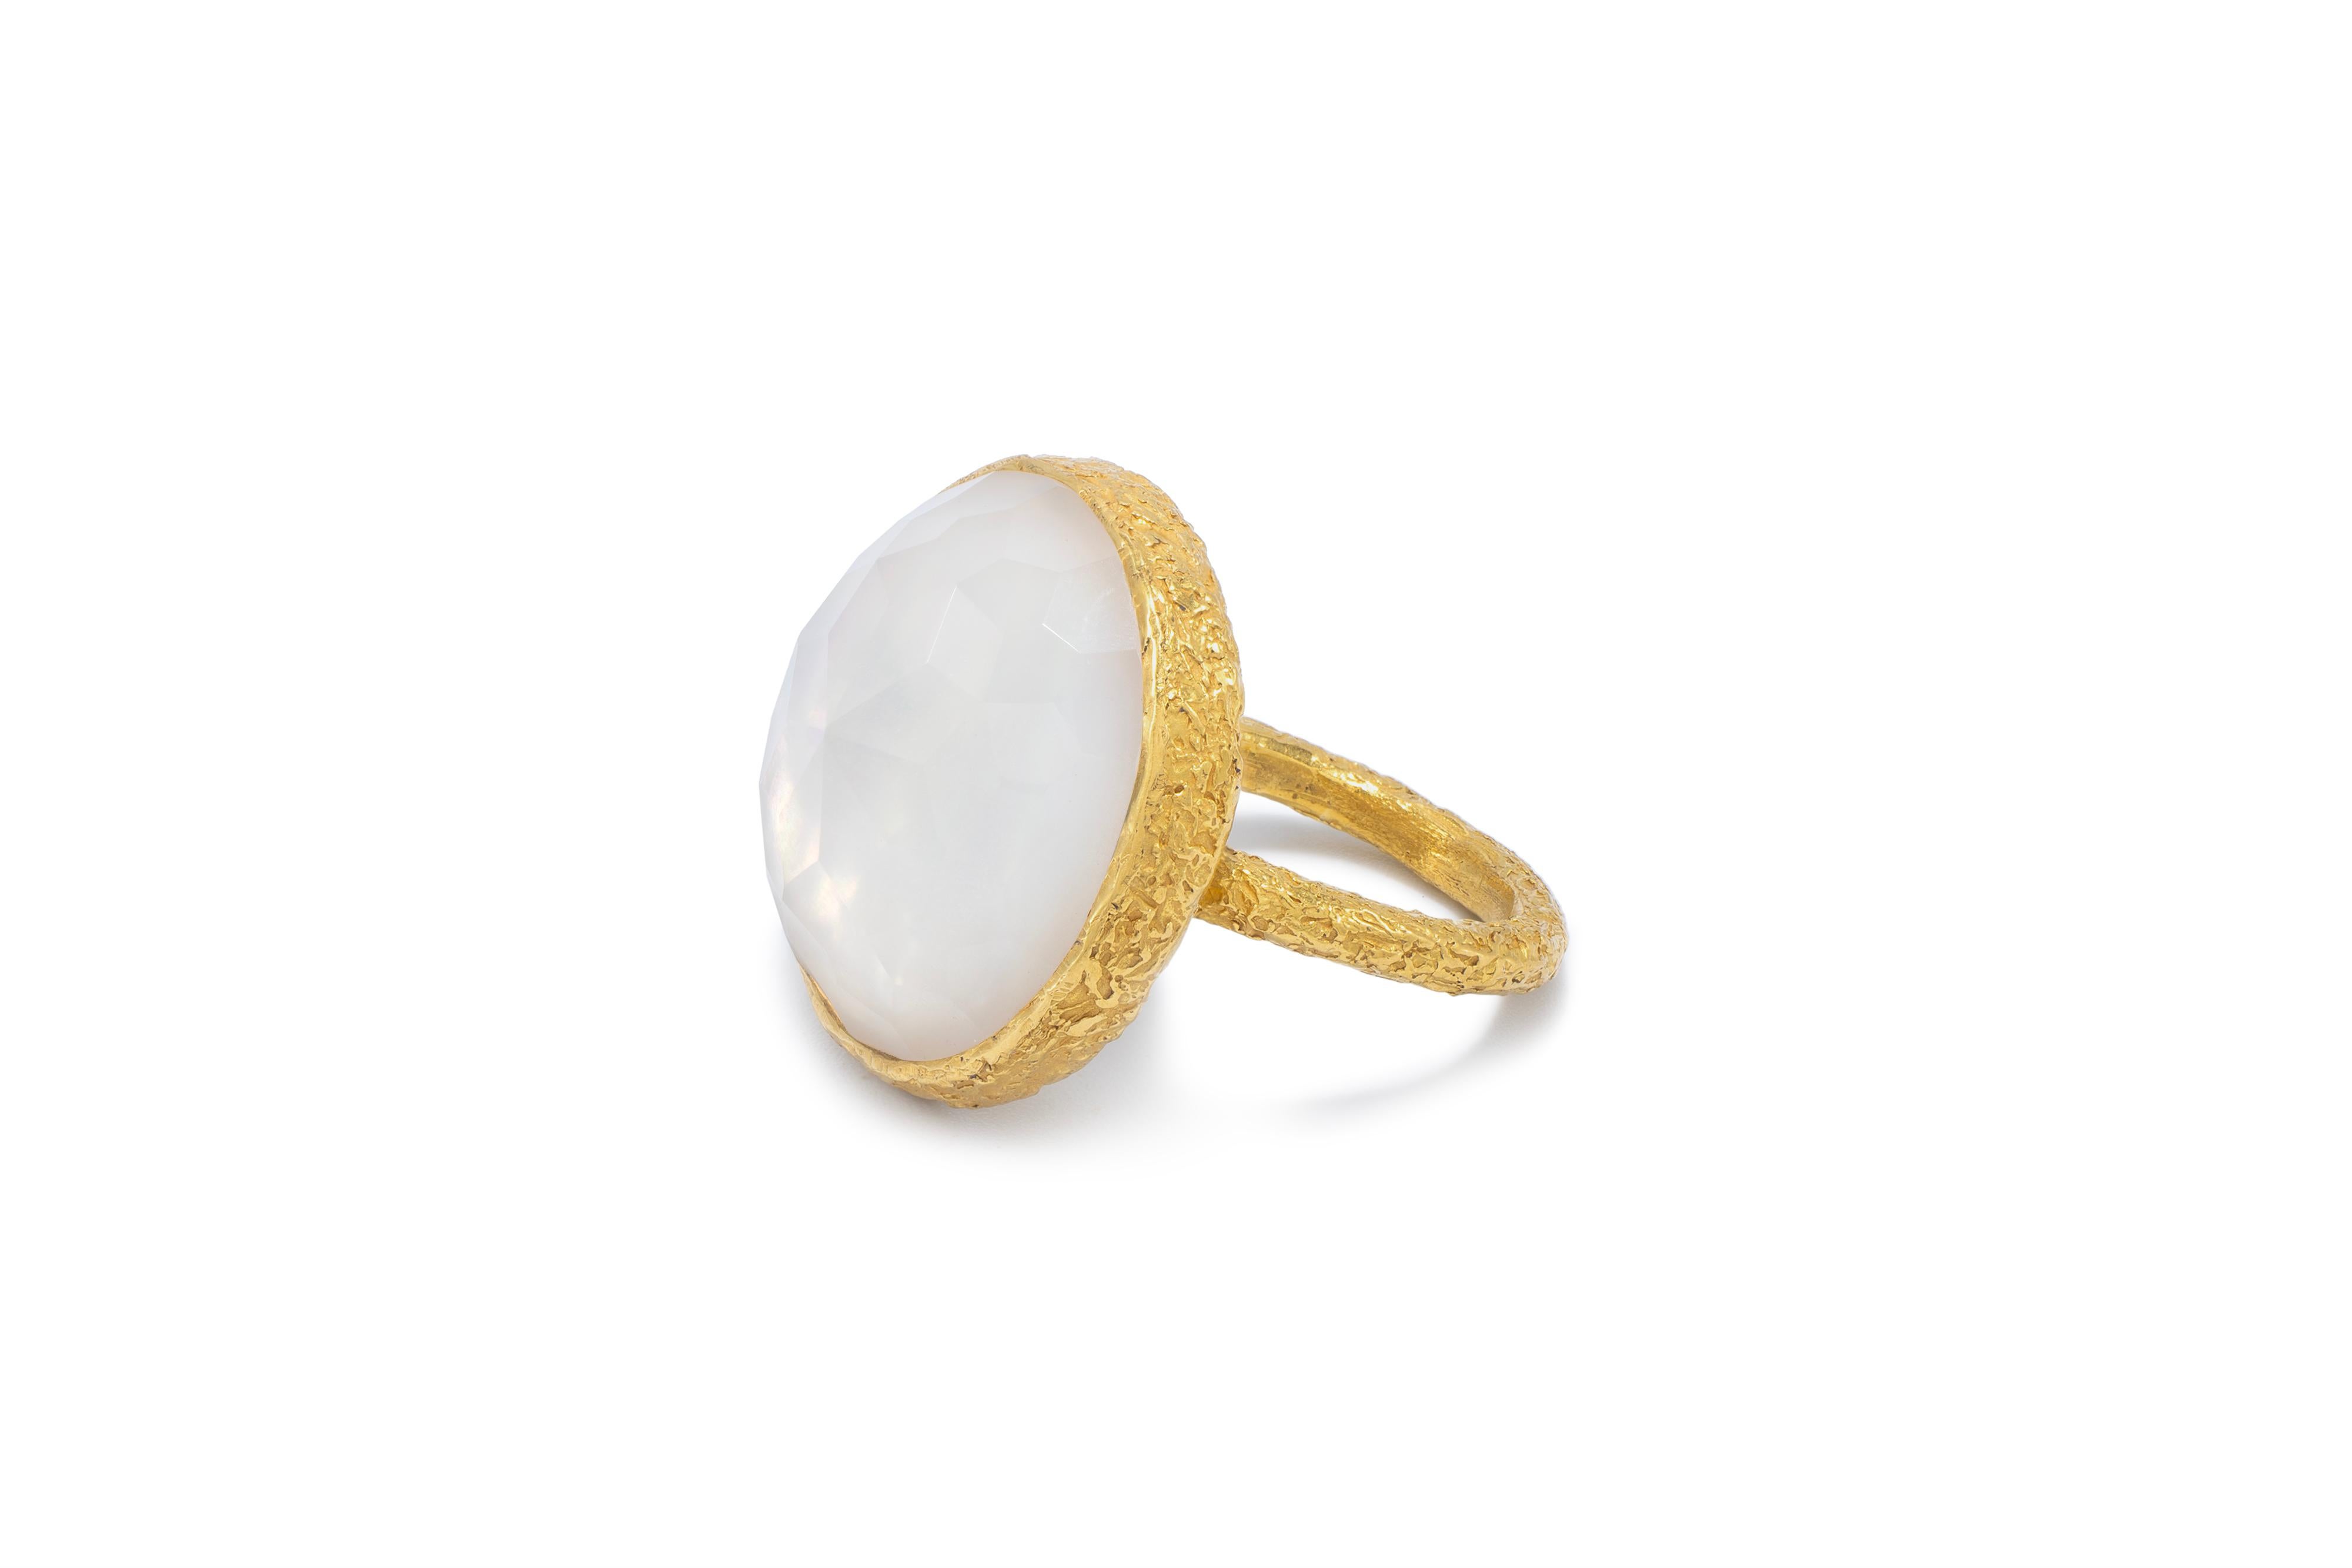 Angelic Pearl and Crystal Cocktail ring is handmade in 22k gold and features Tagili Designs signature finish. The Crystal lays a top the pearl and gives it magical depth and beauty and is part of the Celestial Collection. This collection captures